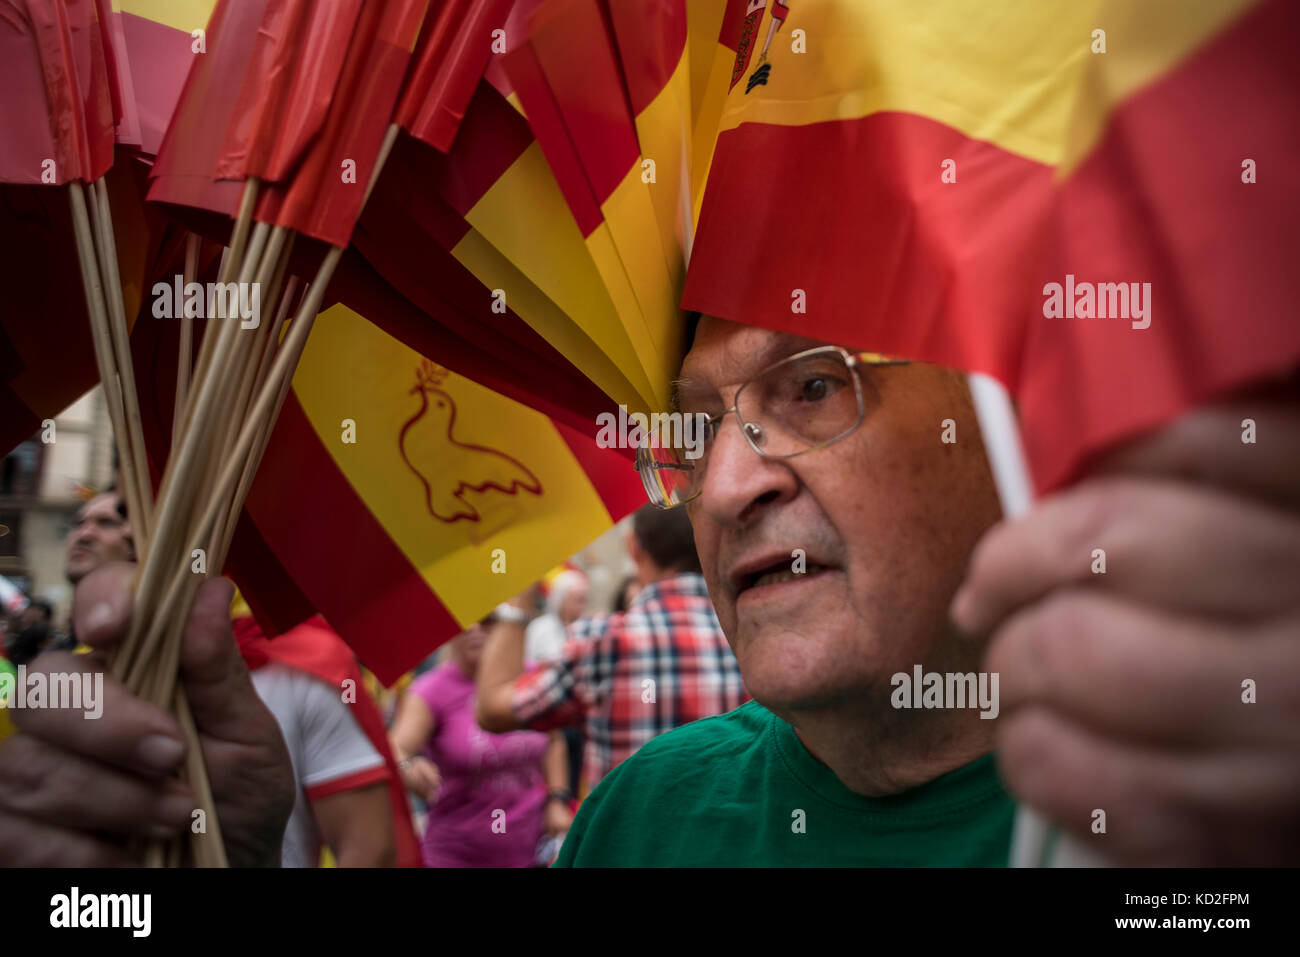 A man distributes flags of Spain in an anti-independence concentration, Barcelona. Credit: Alamy / Carles Desfilis Stock Photo